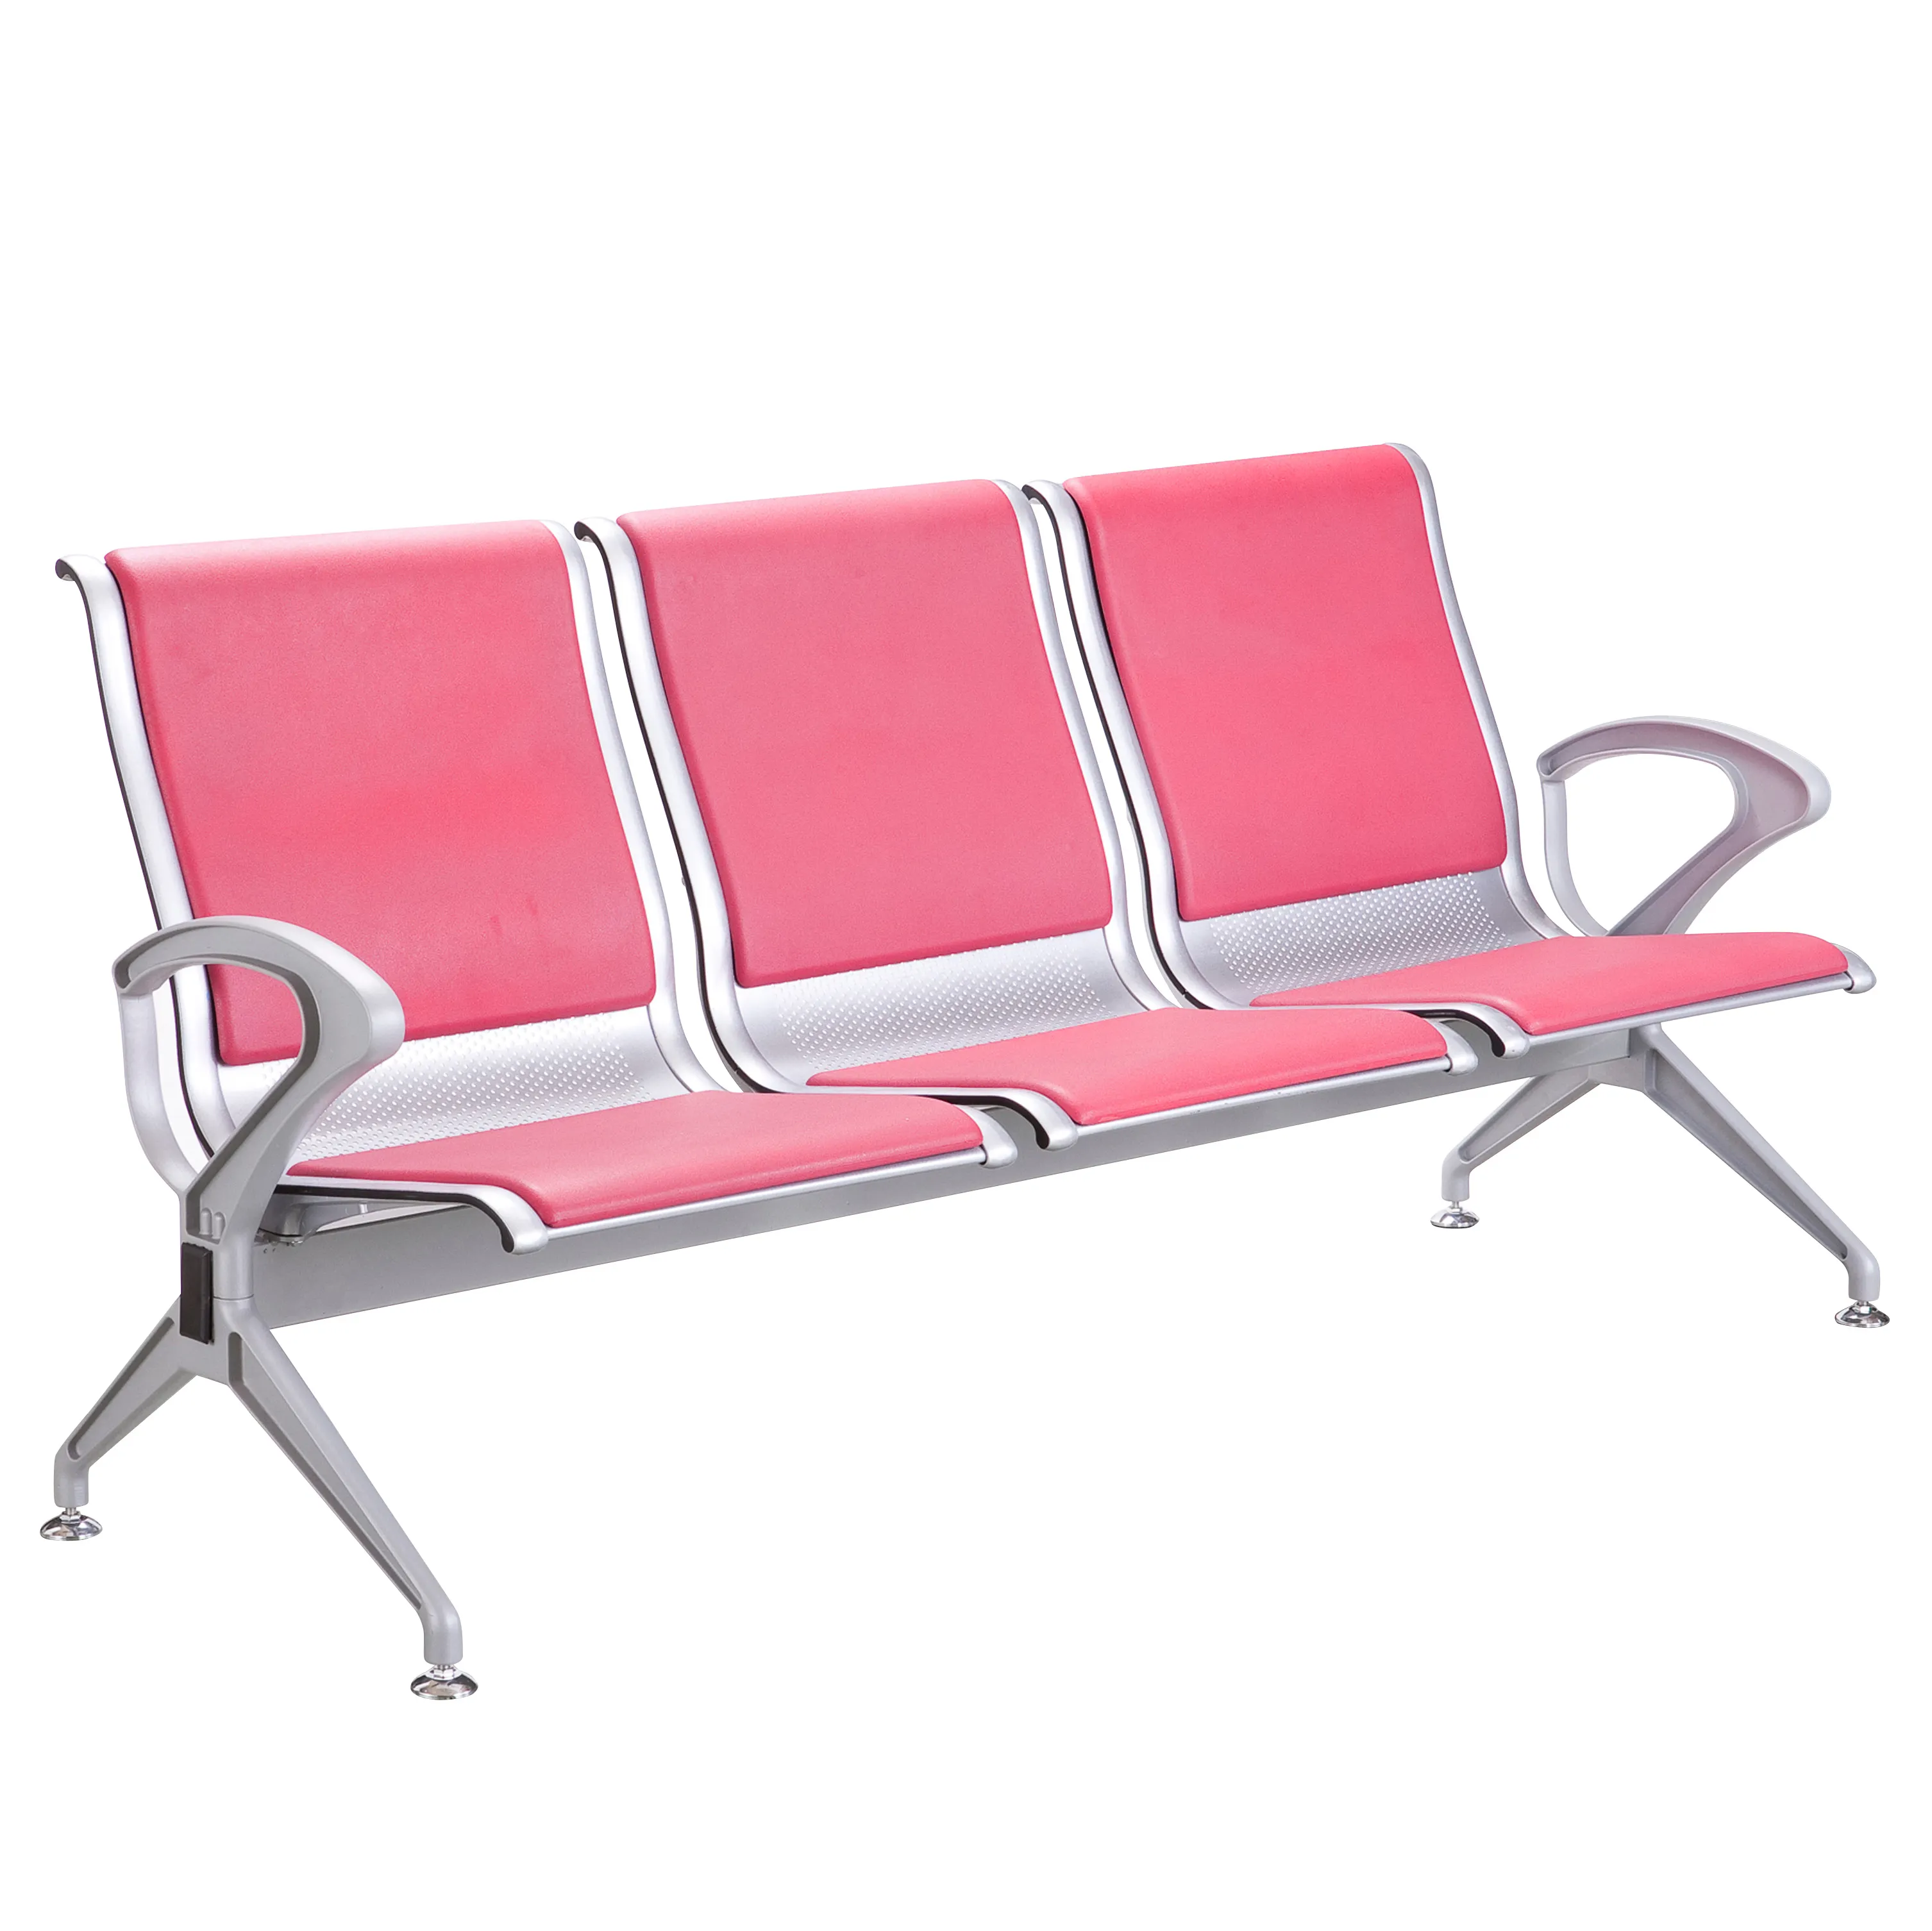 Hot Sale Tandem 3 Seat Airport Chair Public Place Moderne Hospital Clinic Waiting Room Chairs PU Pink Waiting Chairs